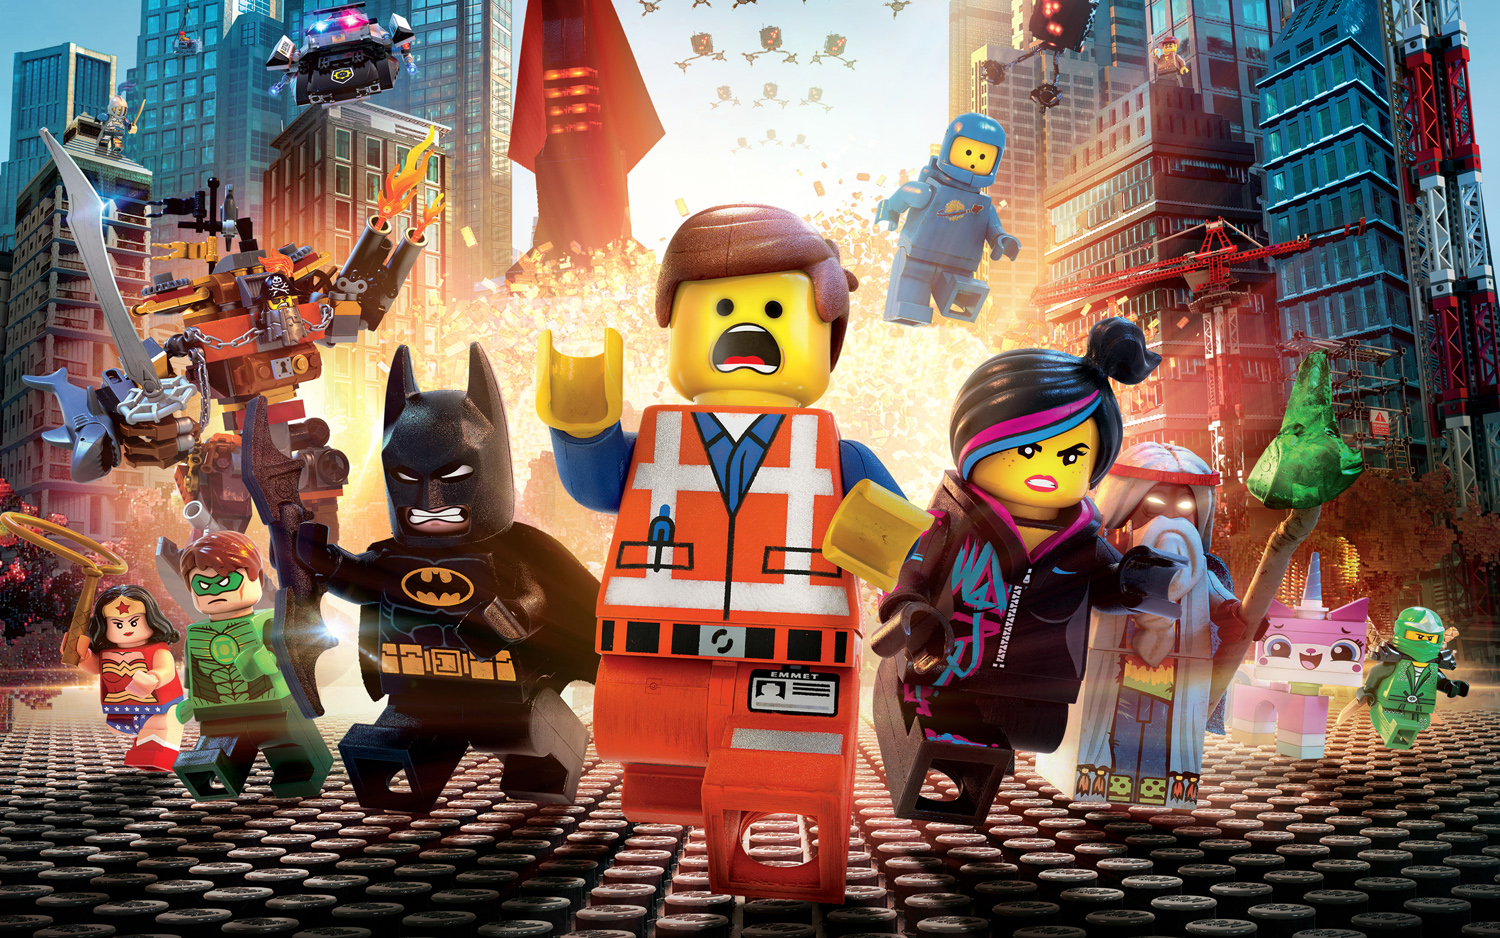 This 25-Question Mixed Trivia Quiz Was Made to Prevent You from Passing. Can You Beat the Odds? The Lego Movie 2014